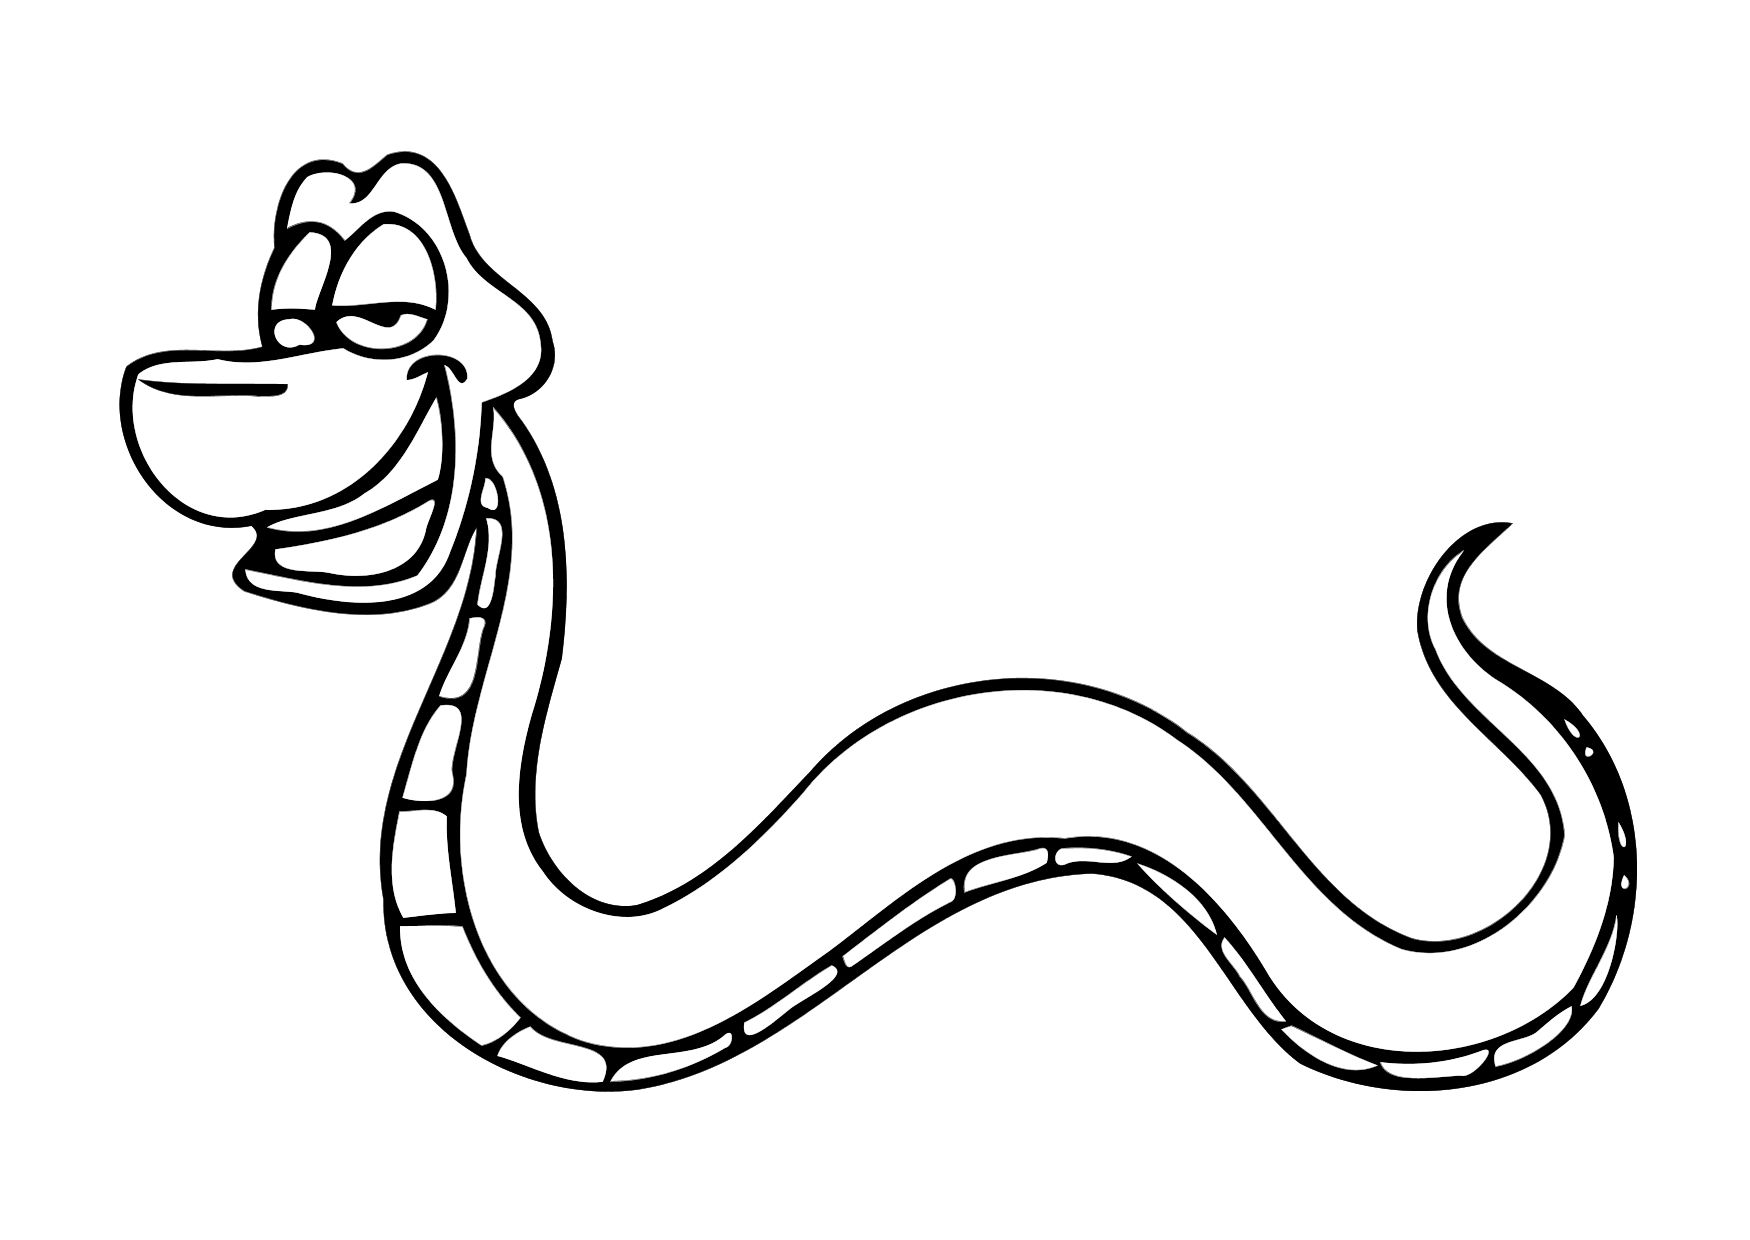 Snake And Design coloring page